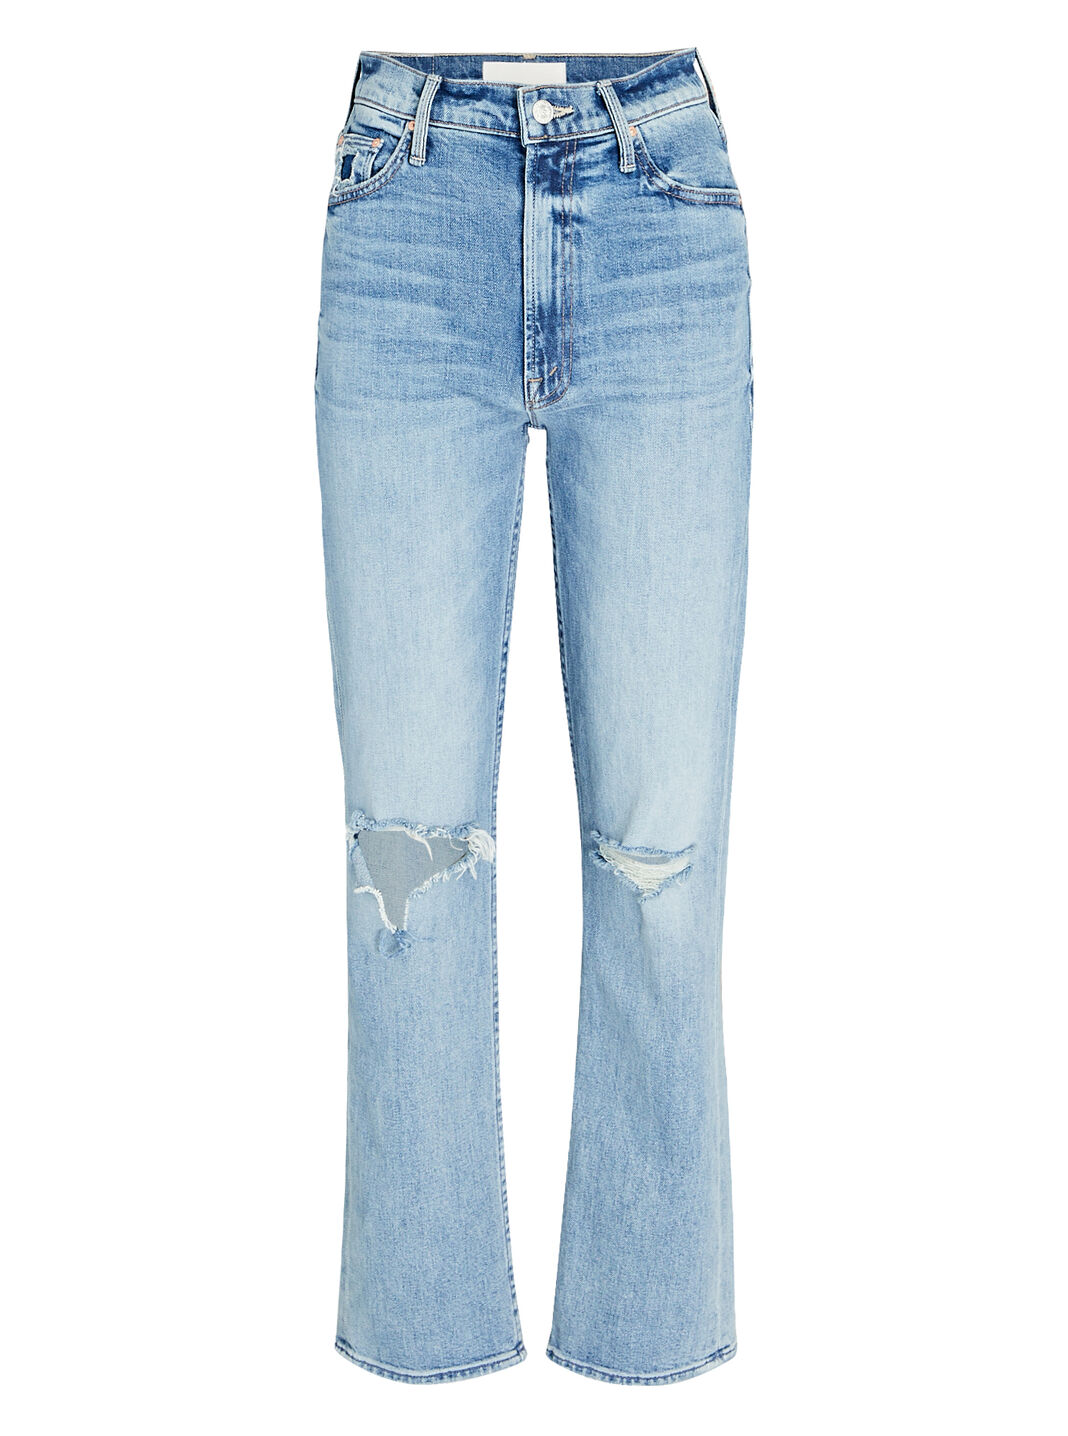 The High-Waisted Rider Jeans